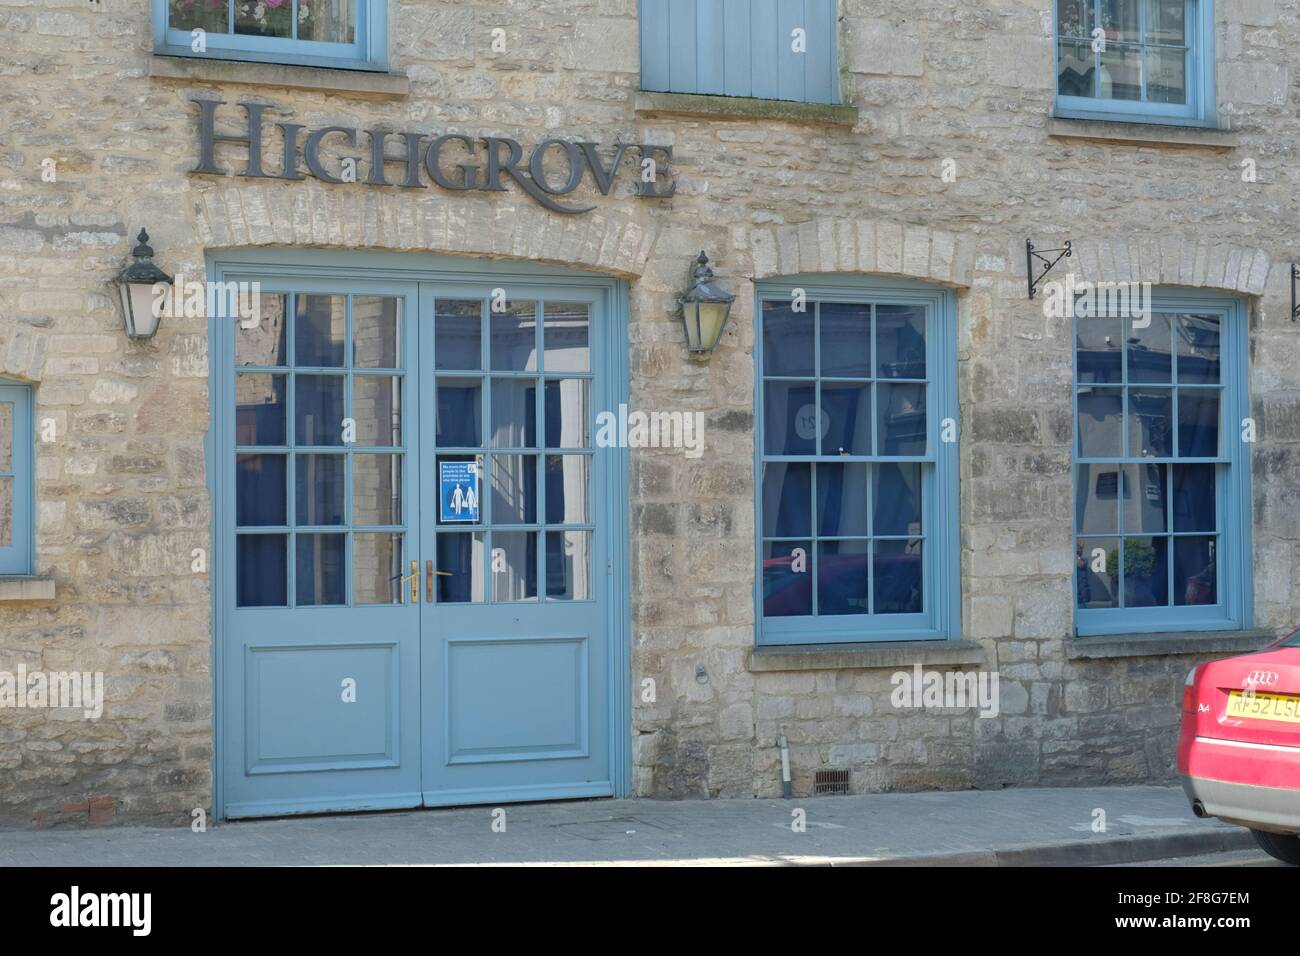 Tetbury, Gloucestershire;, UK. 14th Apr, 2021. Local shops show their respect for the late Duke of Edinburgh, Prince Phillip. The Highgrove shop is closed. Tetbury has many links with the royal family, Prince Charles has a home at Highgrove House and Princess Anne at Gatcombe Park just a few miles away. Credit: JMF News/Alamy Live News Stock Photo